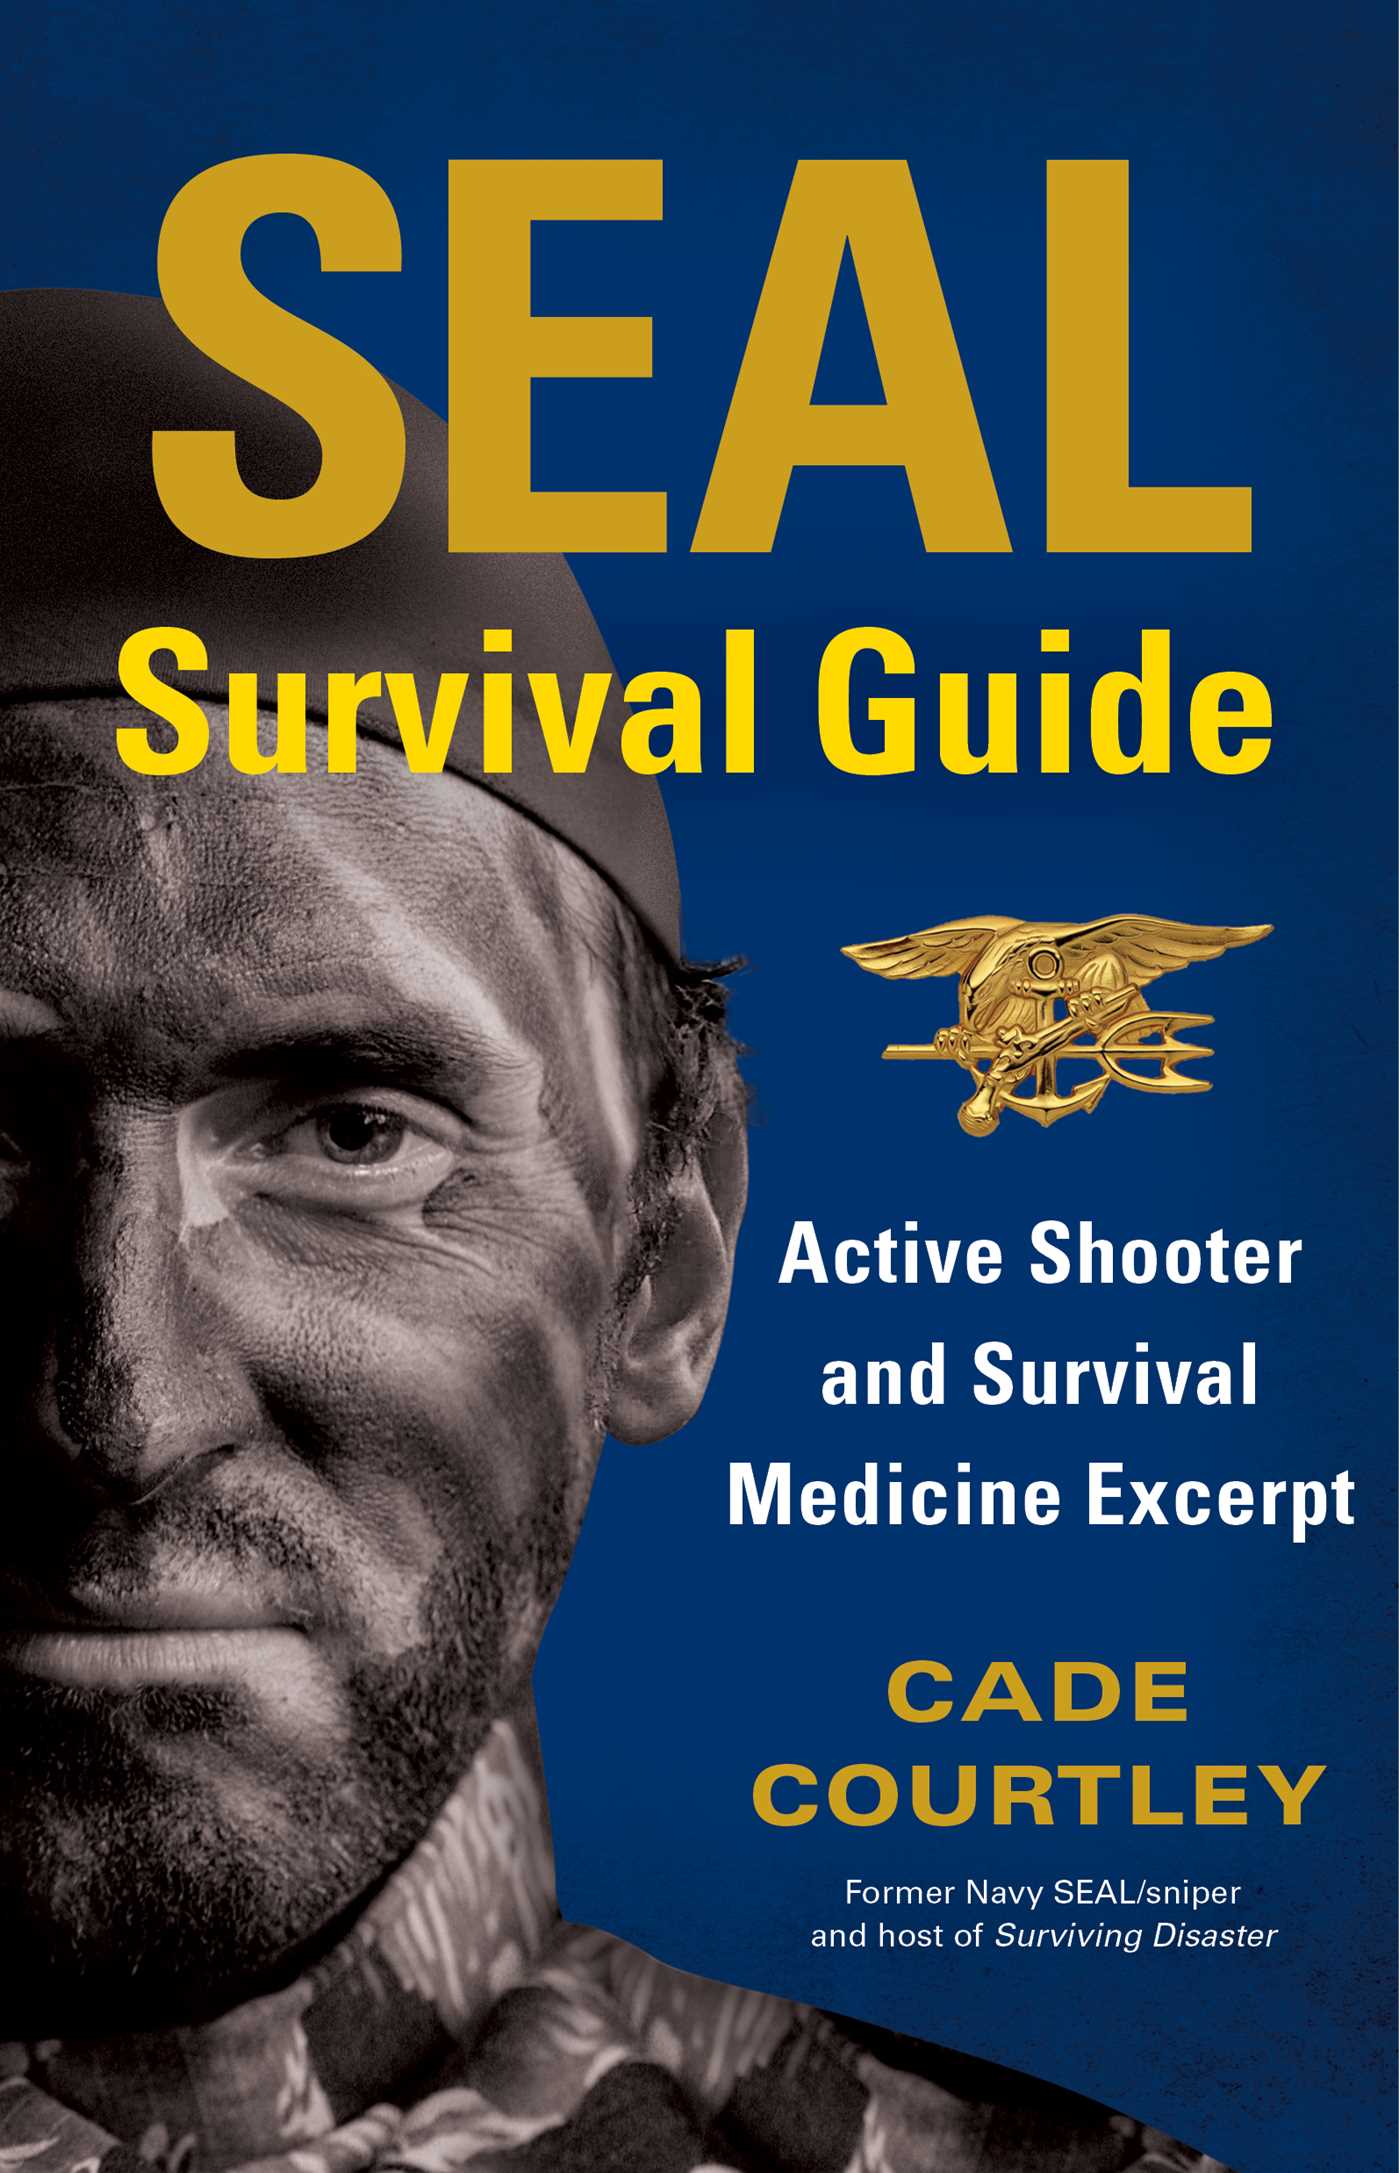 “SEAL SURVIVAL GUIDE”, by Cade Courtley, turbomind.com